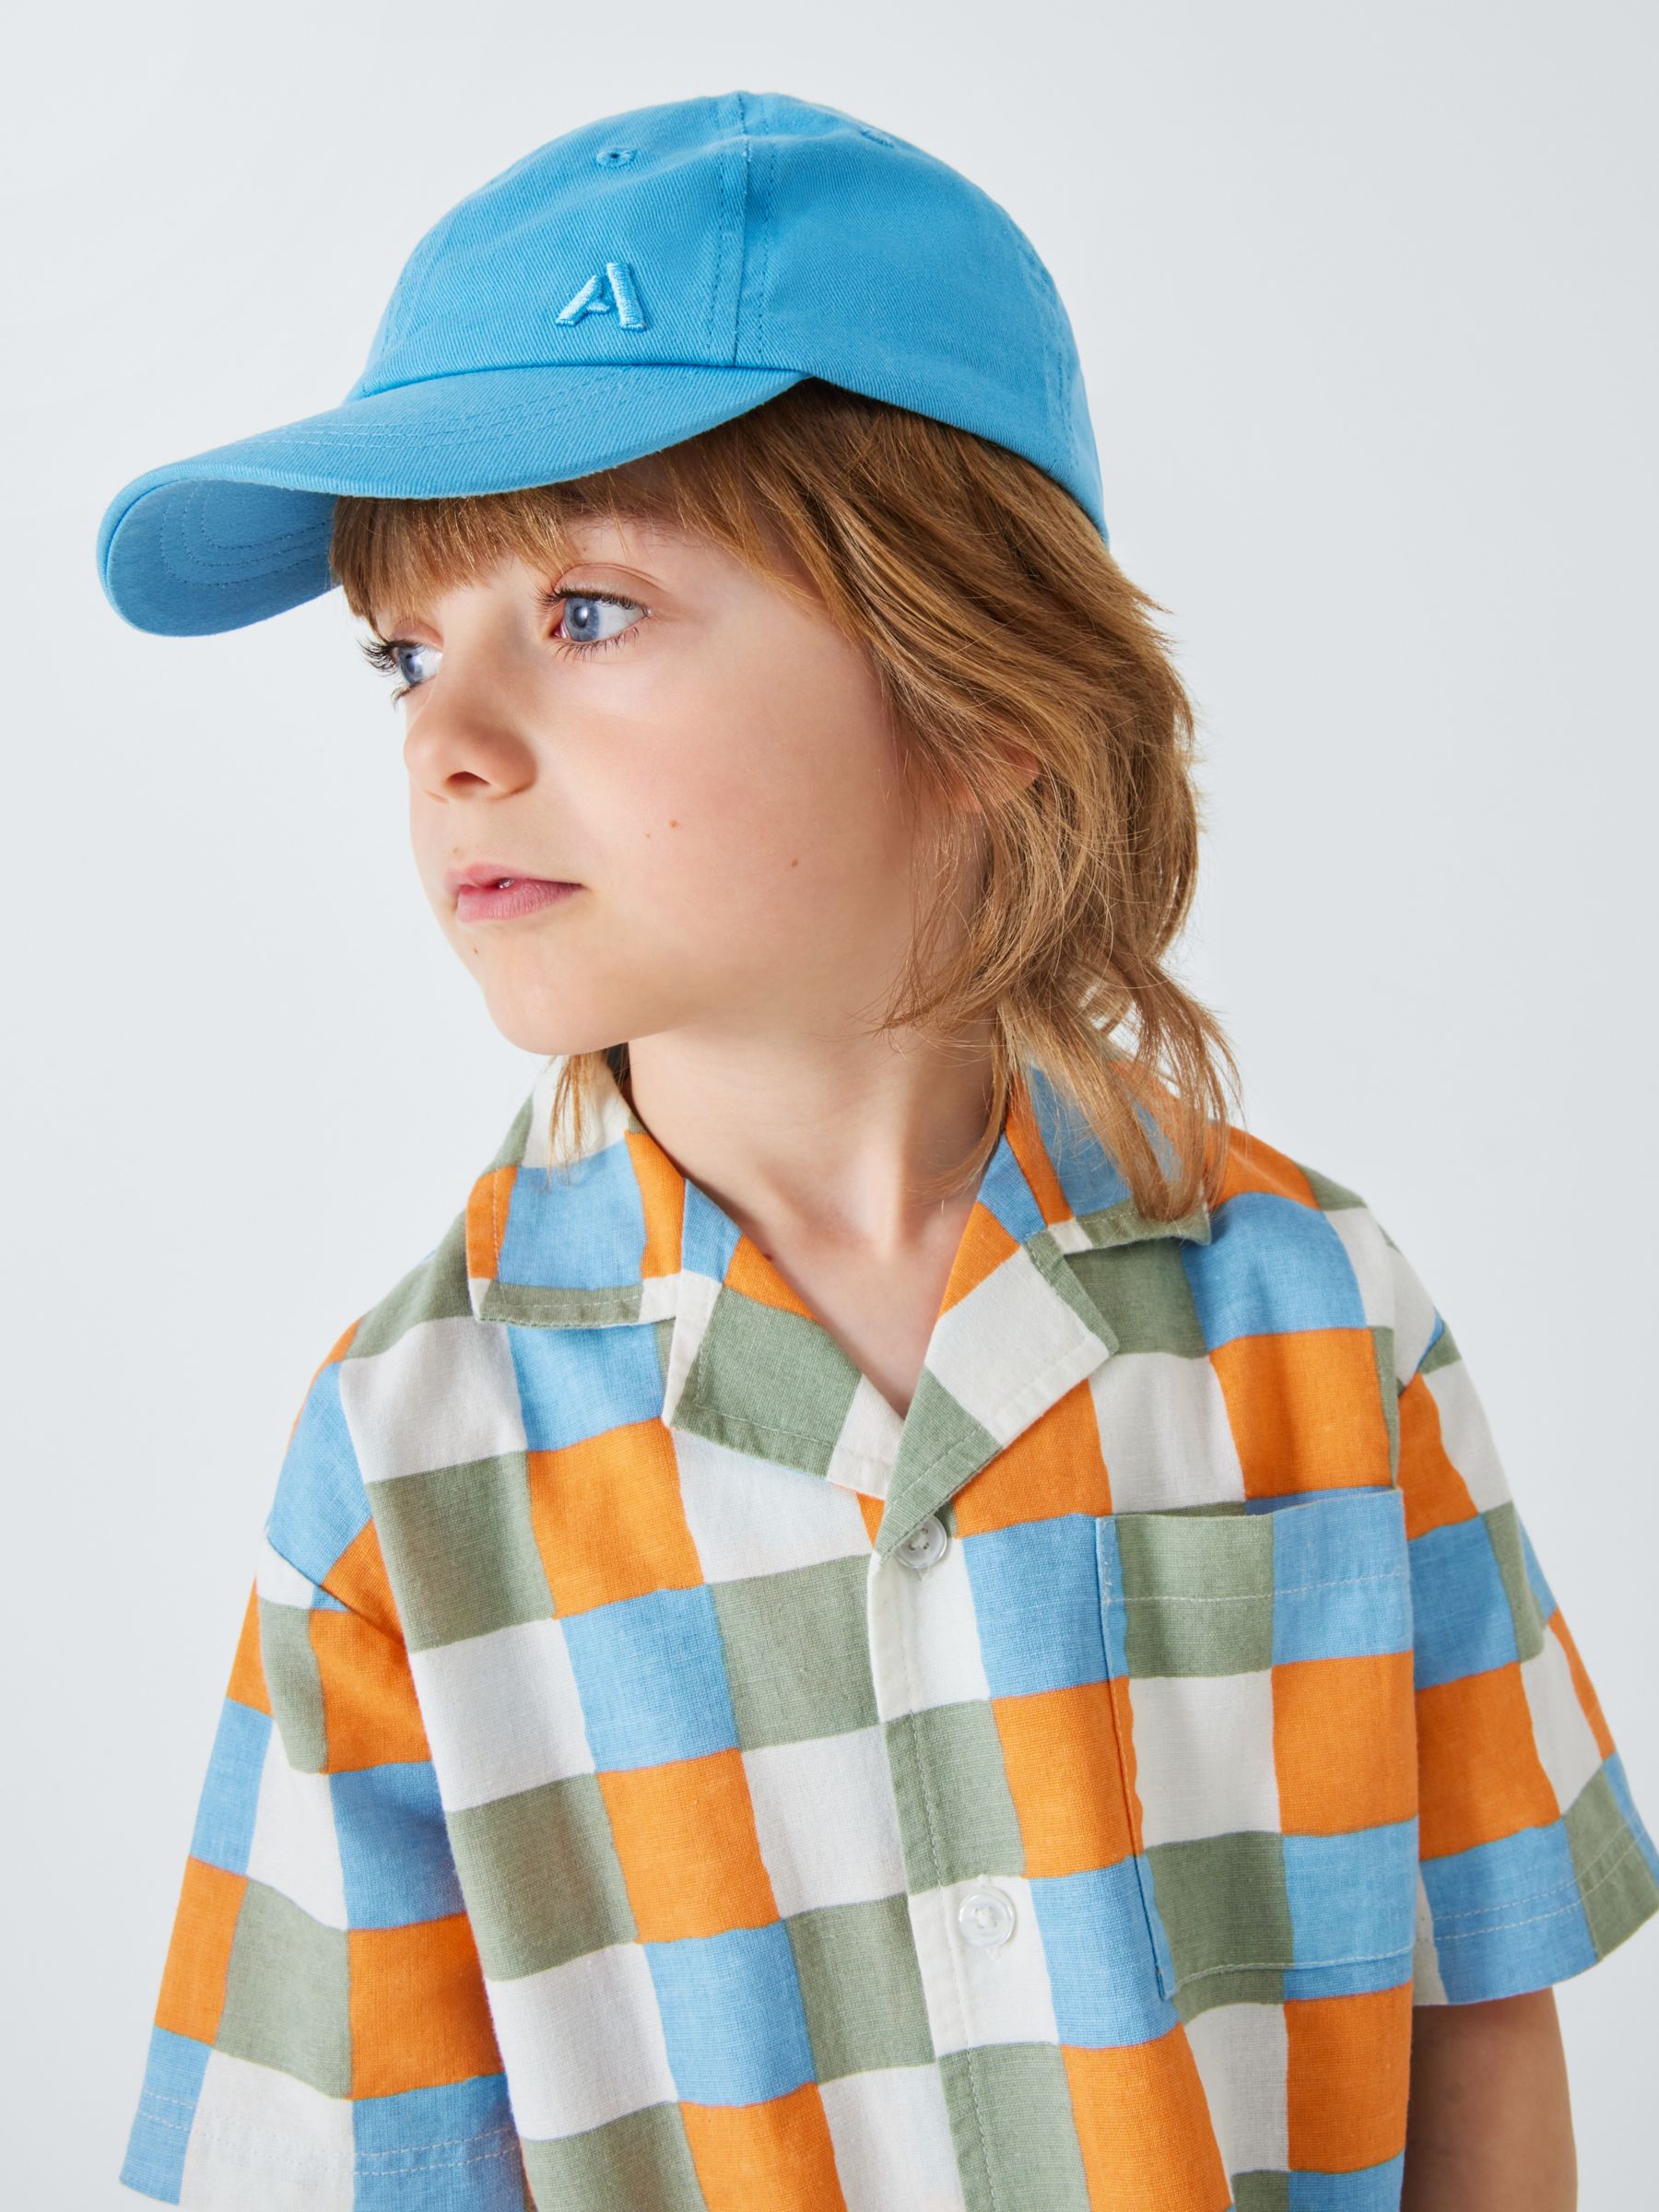 John Lewis ANYDAY Kids' Embroidered Baseball Cap, Blue, 6-8 years